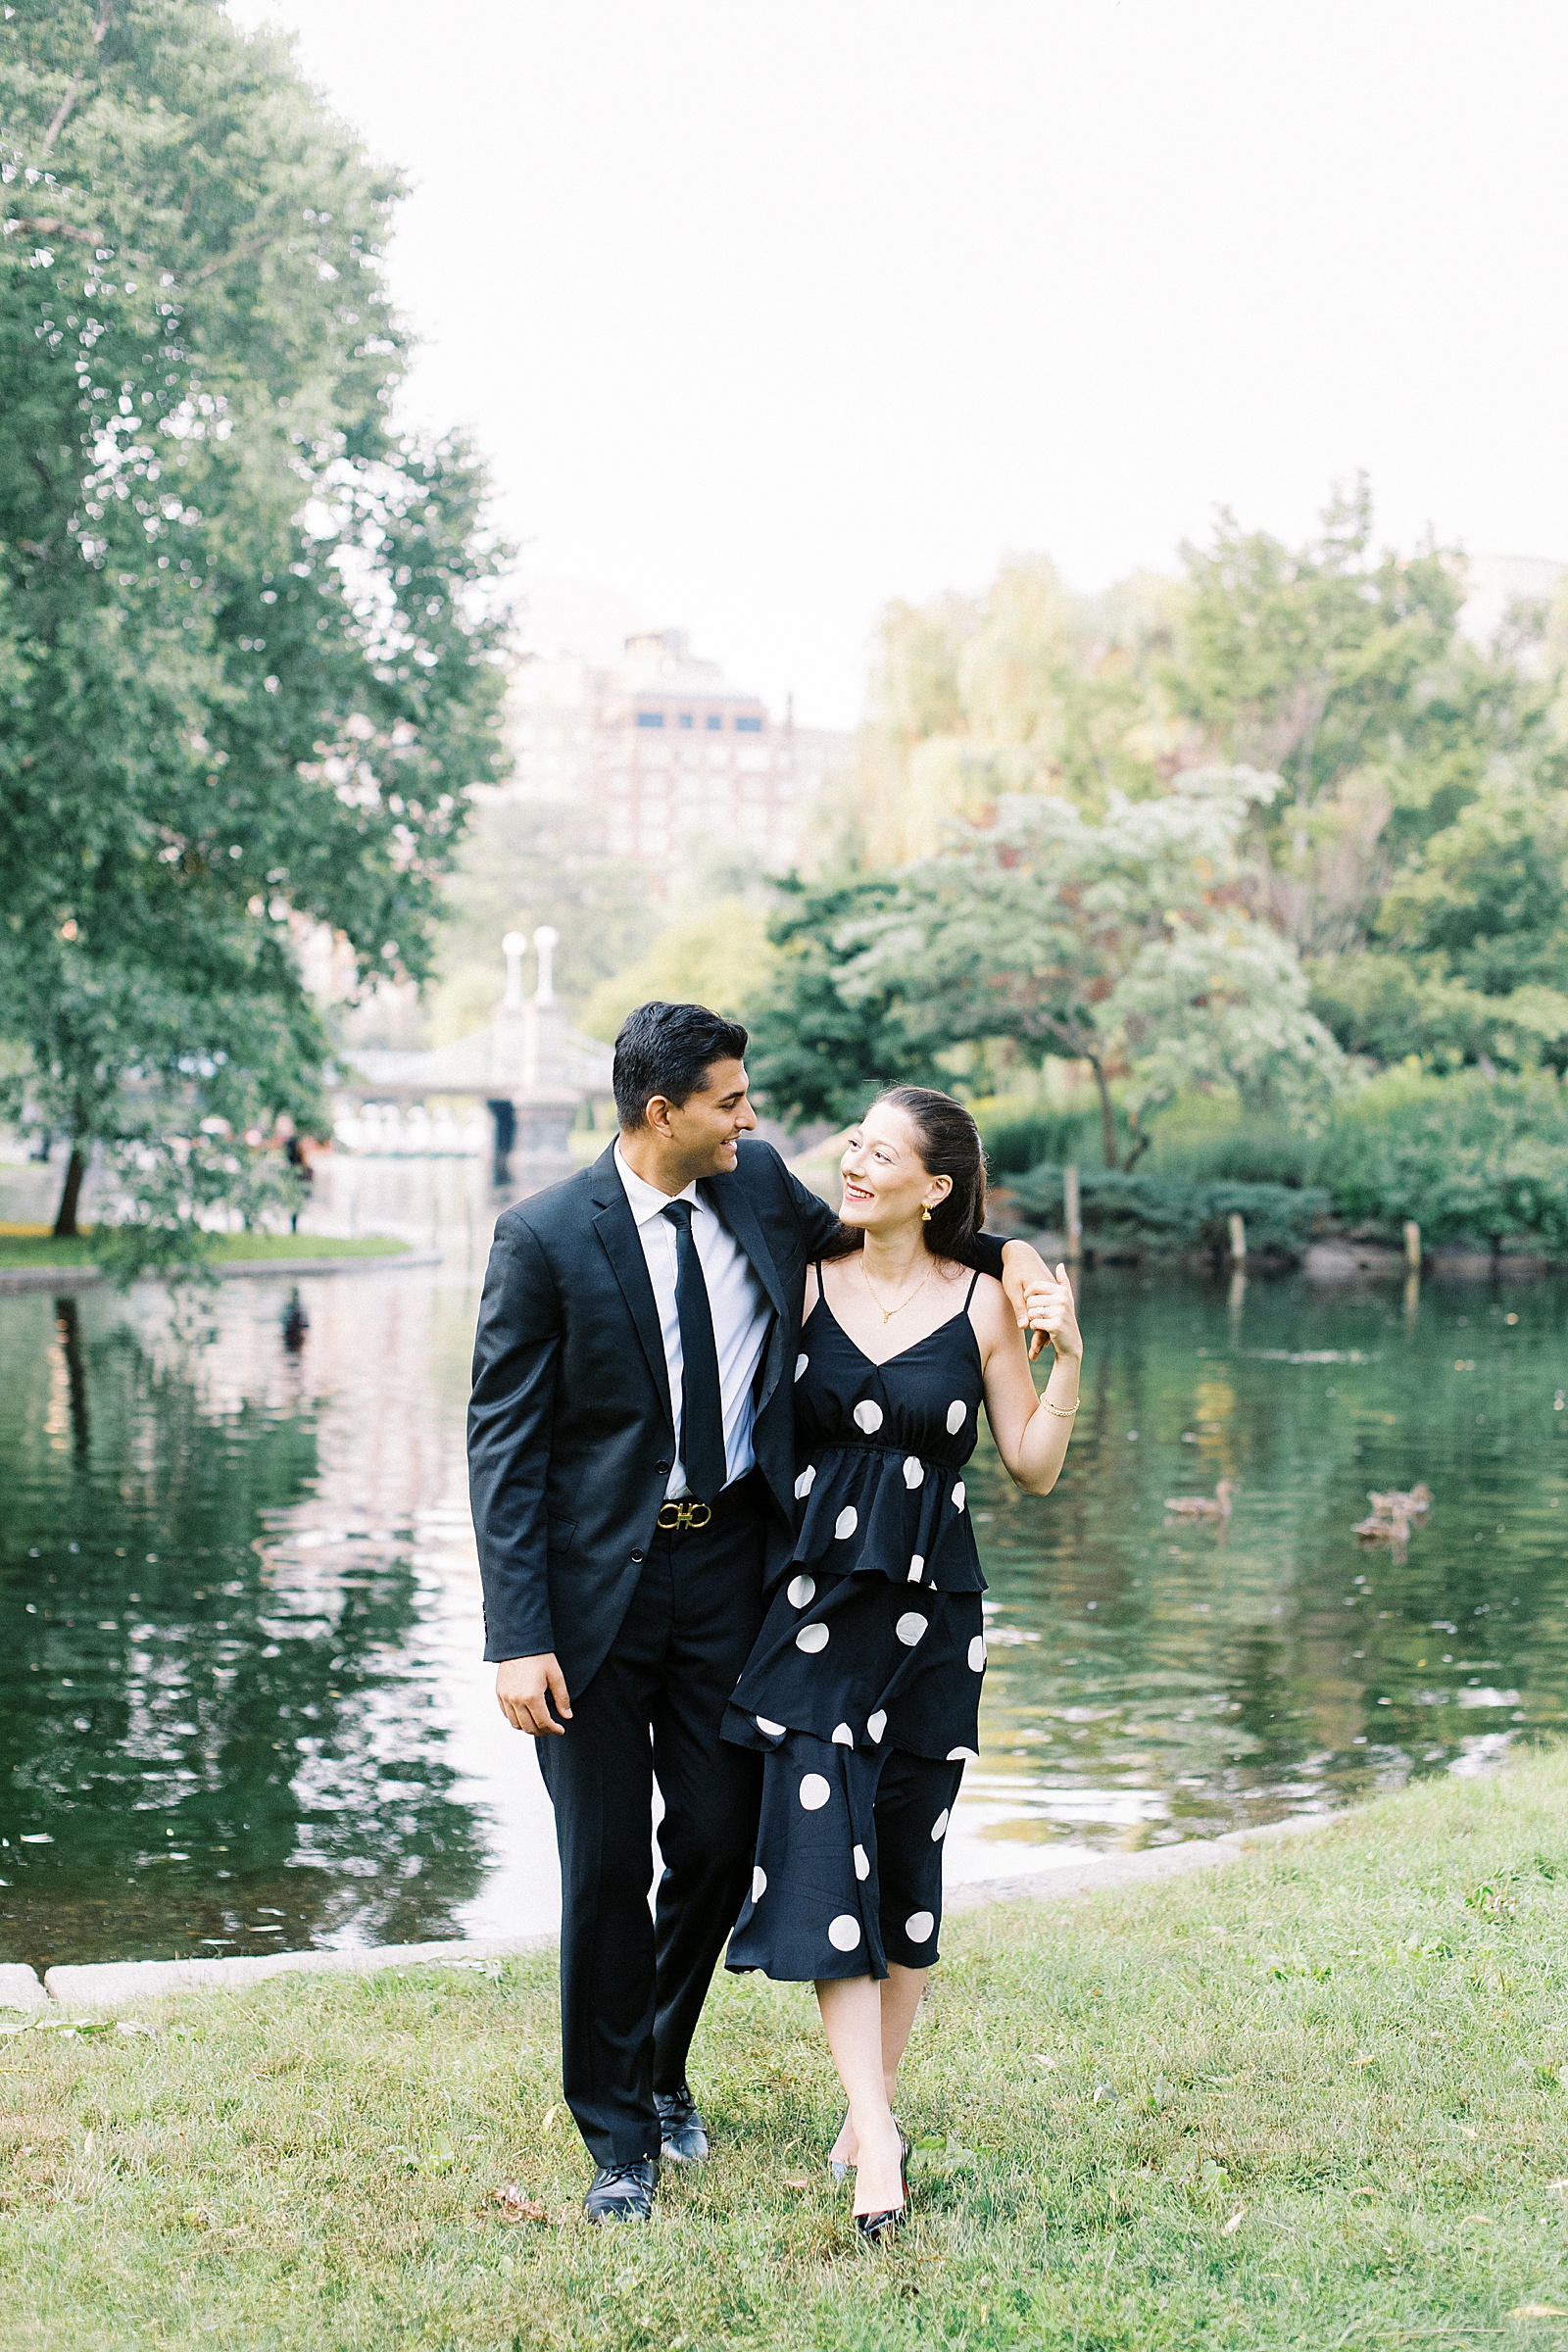 Couple walking arm in arm next to pond for public garden engagement session